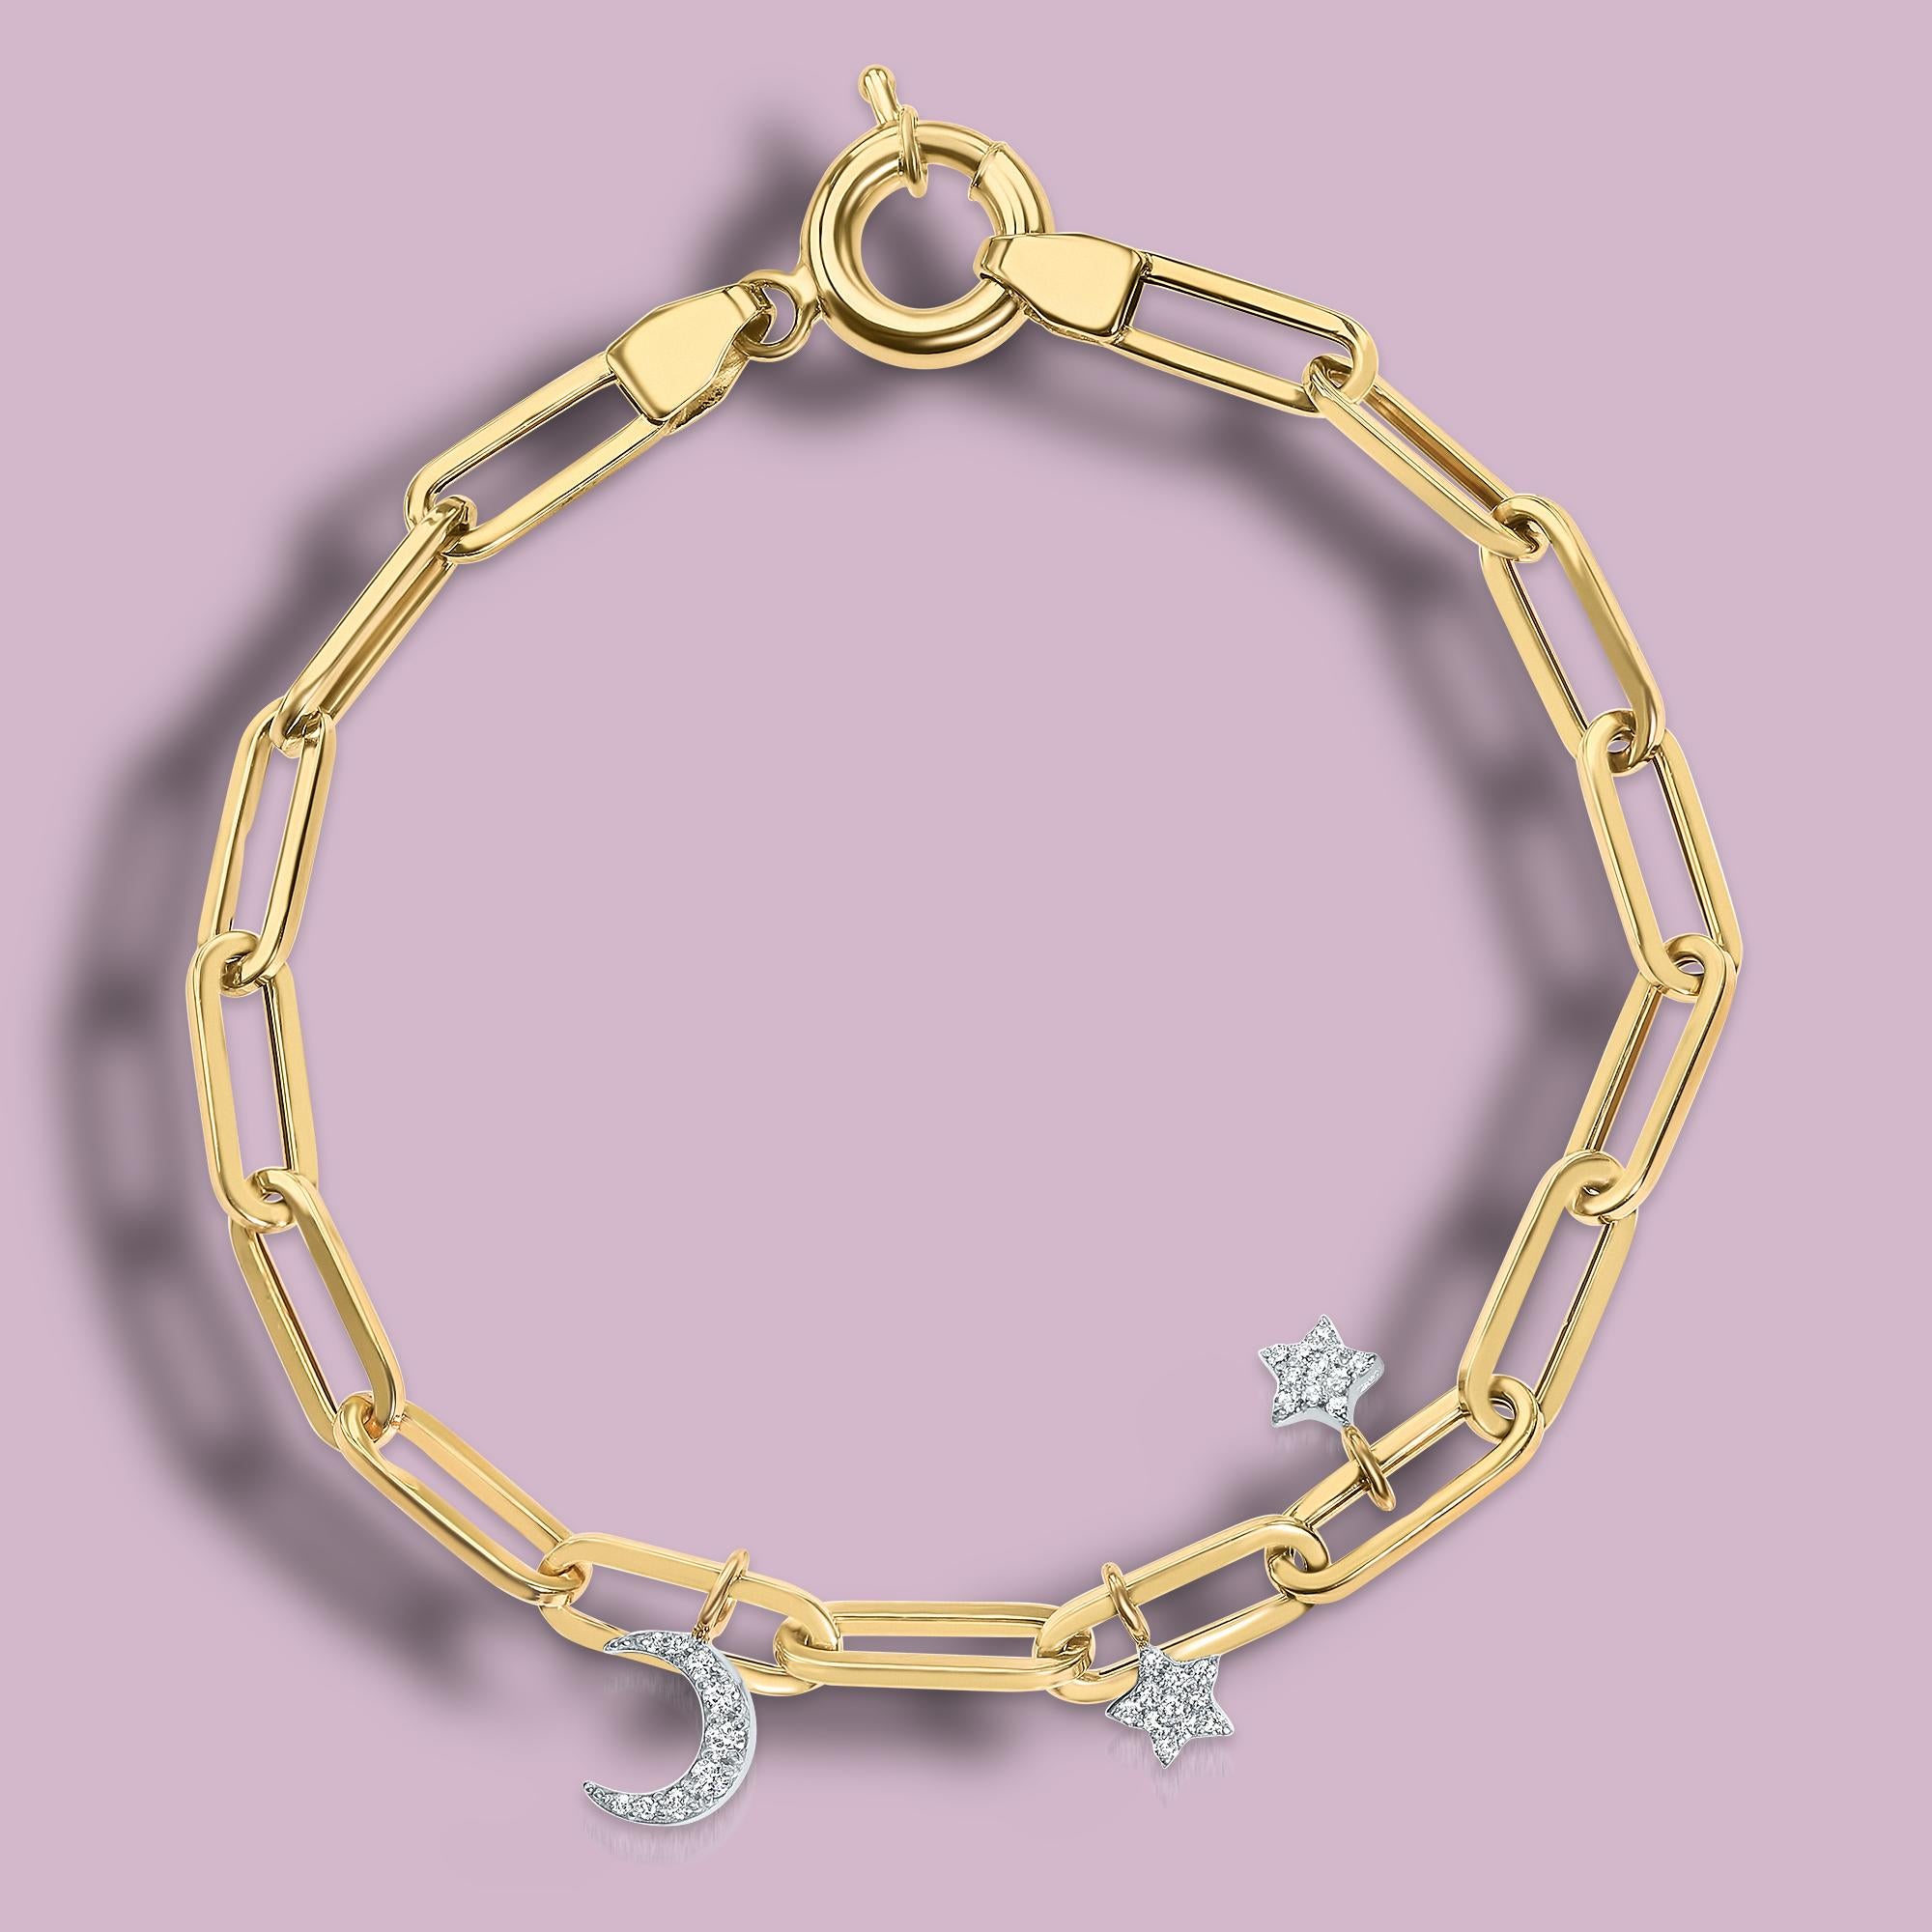 chain bracelet with charms